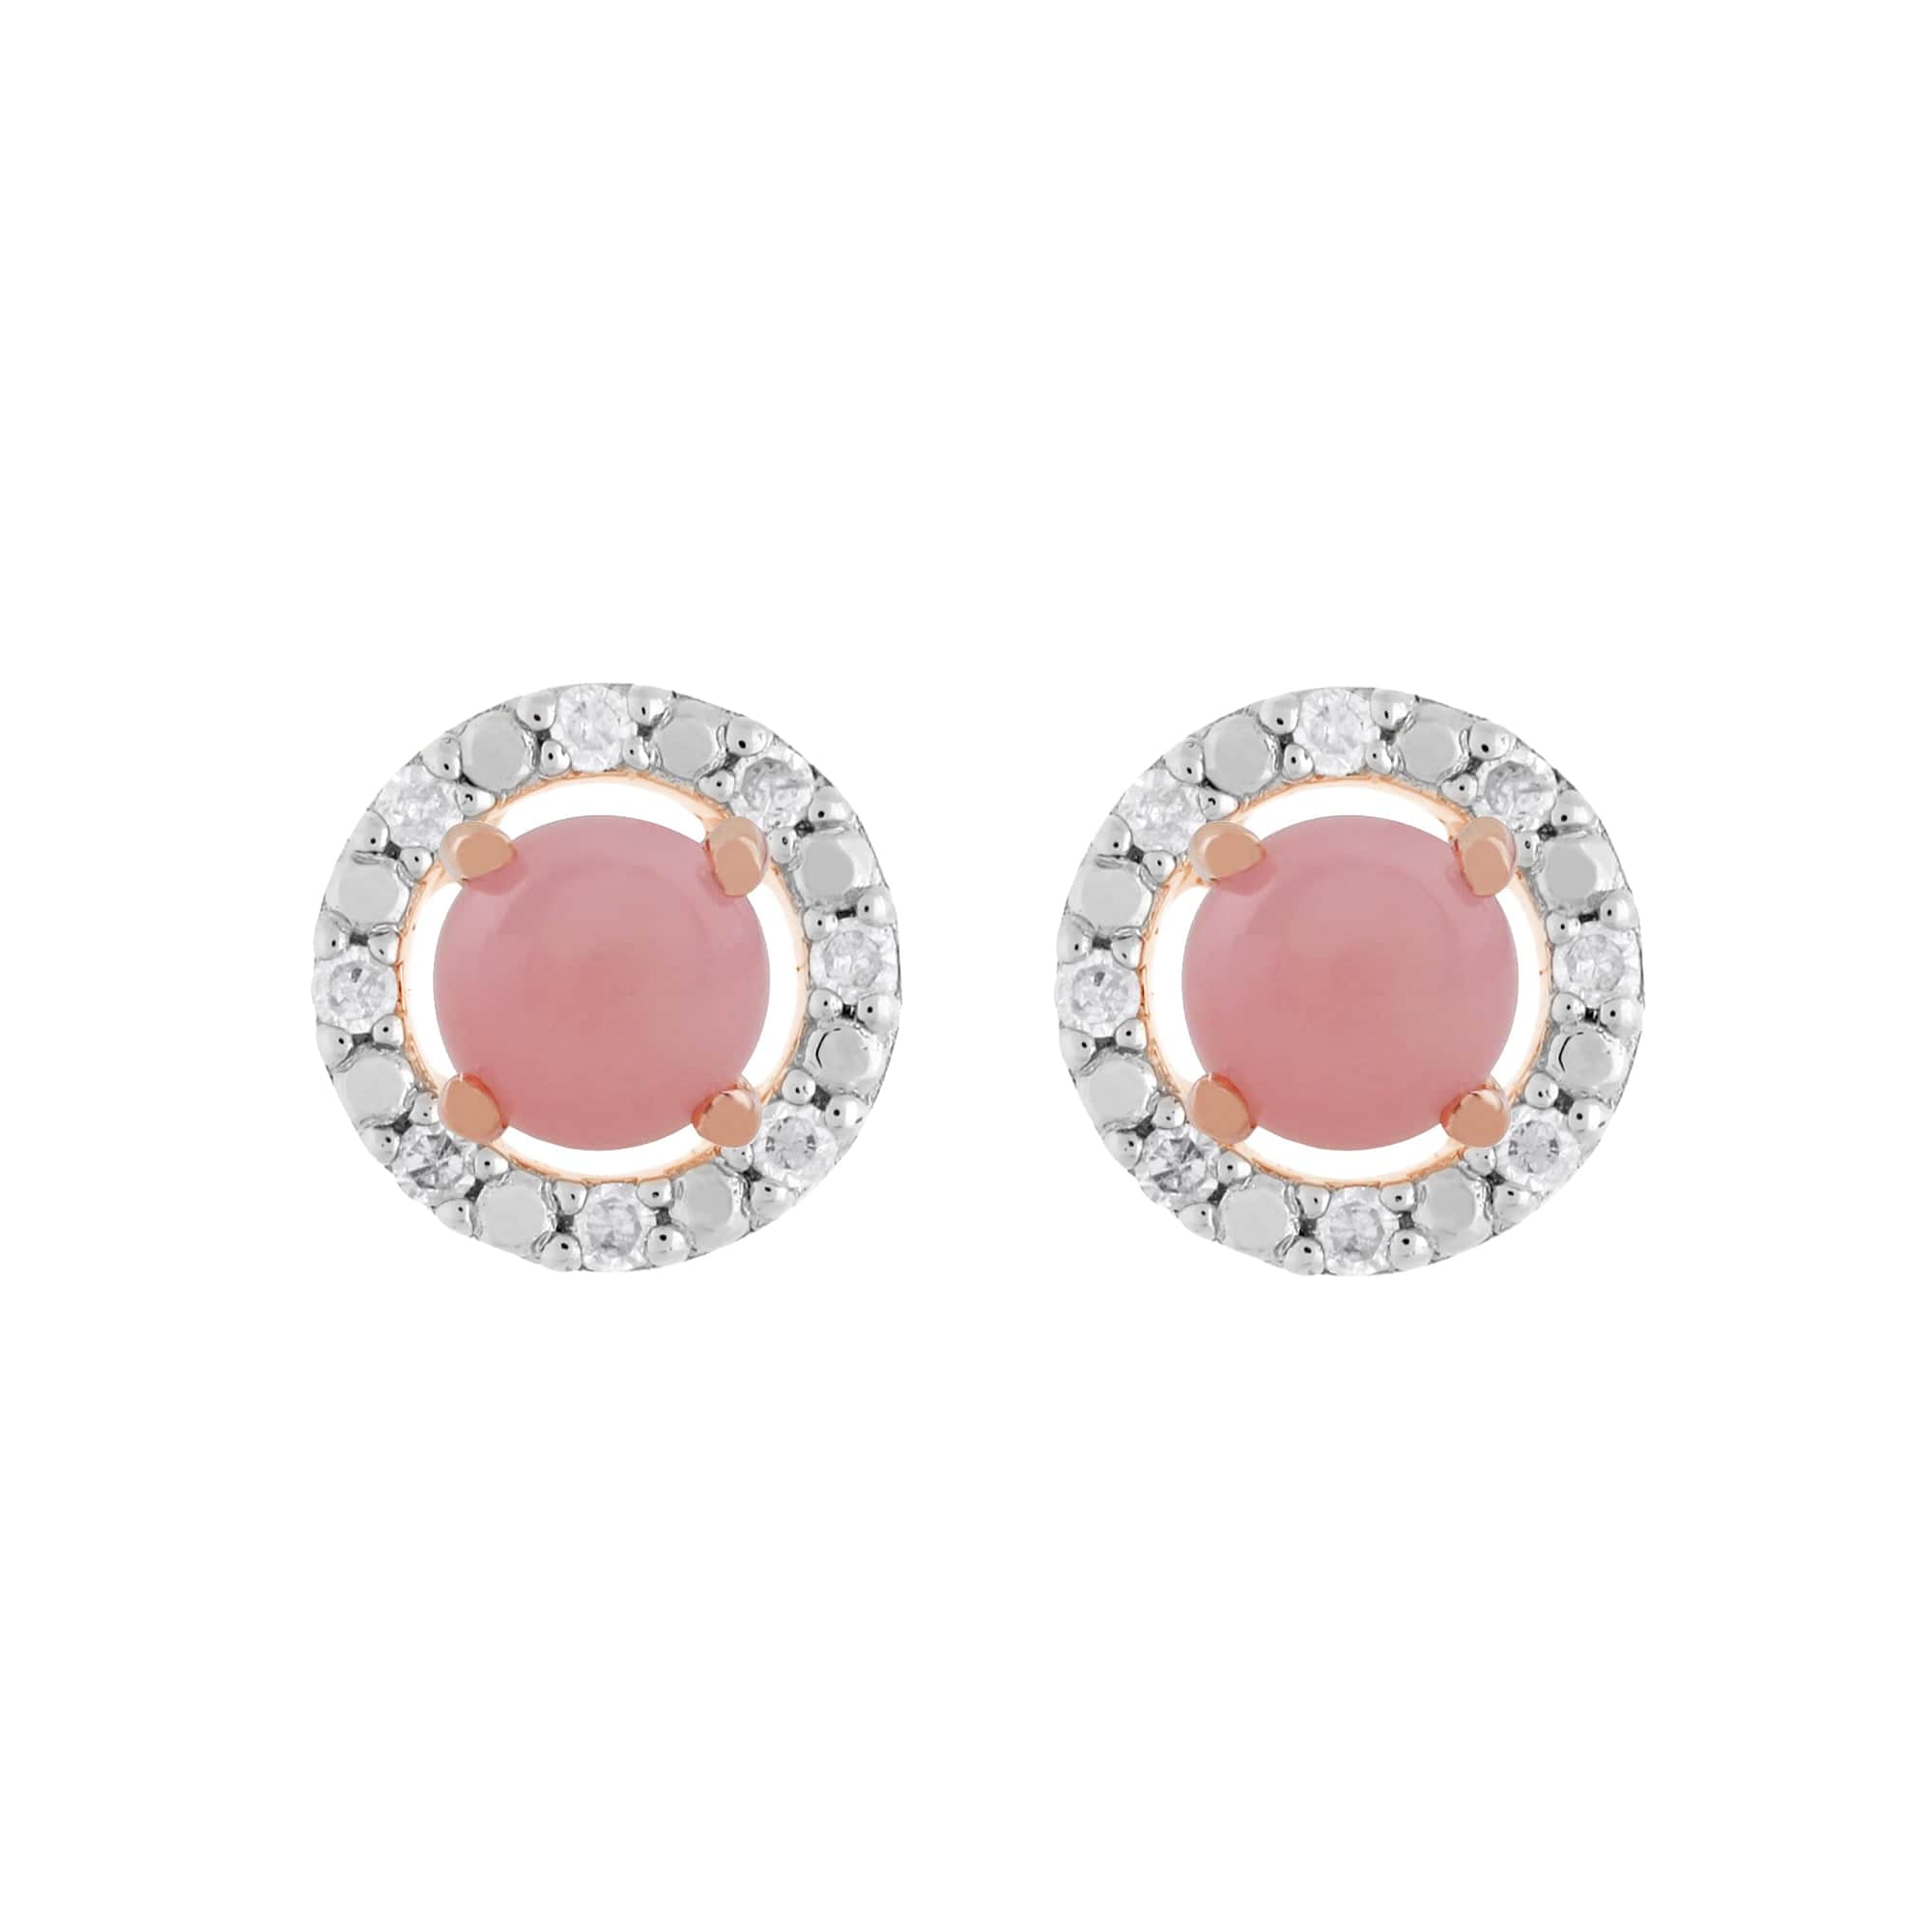 183E4316039-191E0377019 Classic Round Pink Opal Stud Earrings with Detachable Diamond Round Ear Jacket in 9ct Rose Gold 1